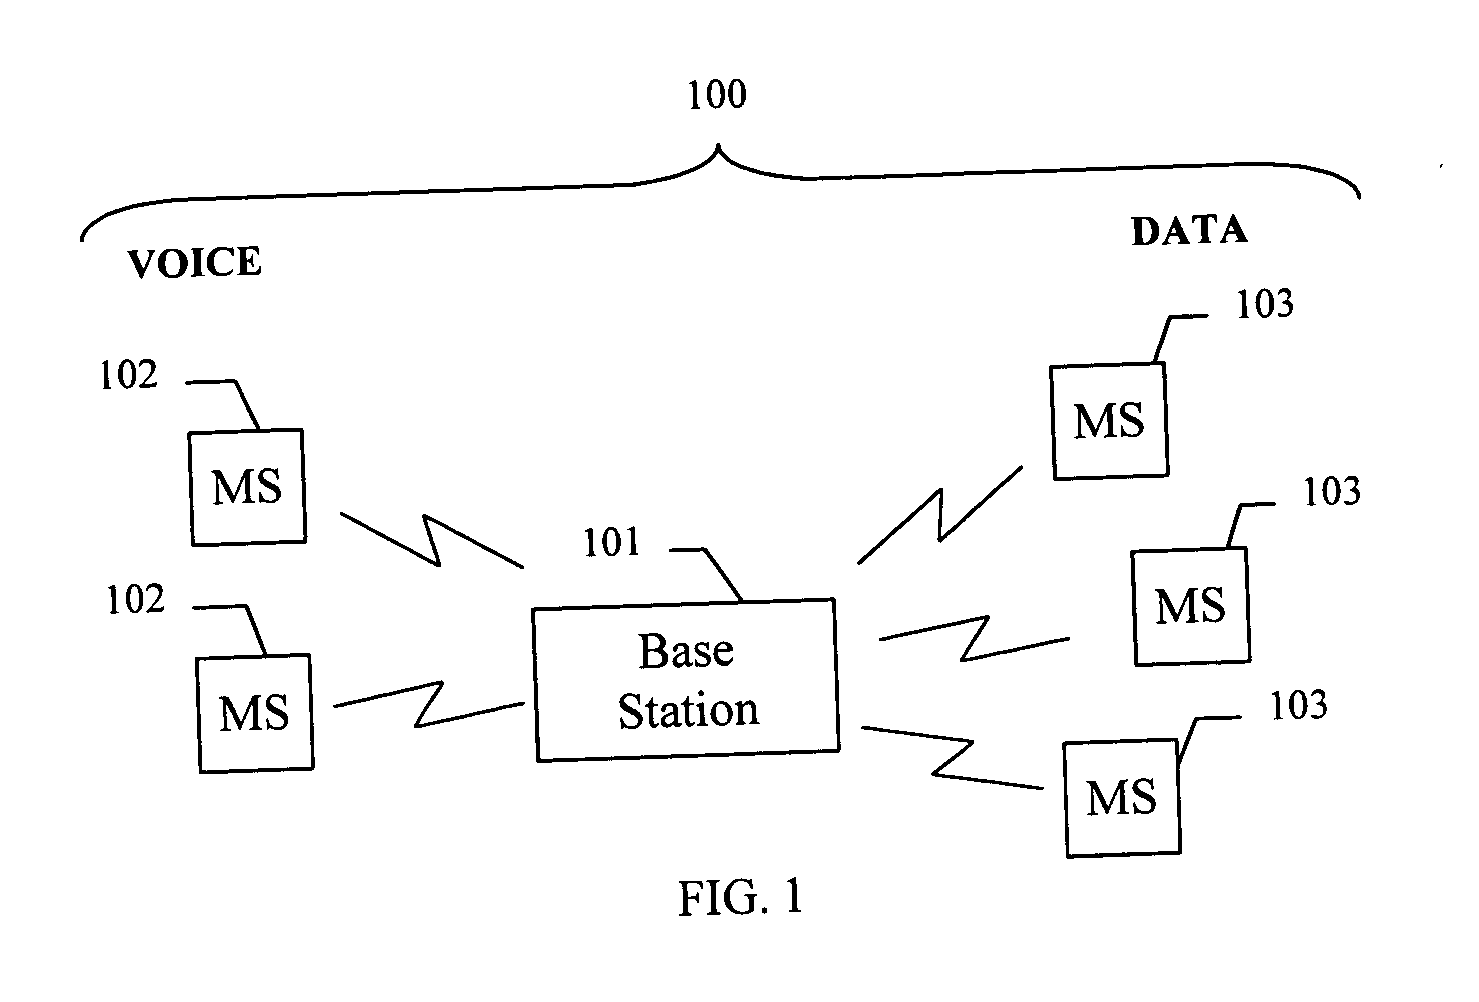 Scheduling of wireless packet data transmissions